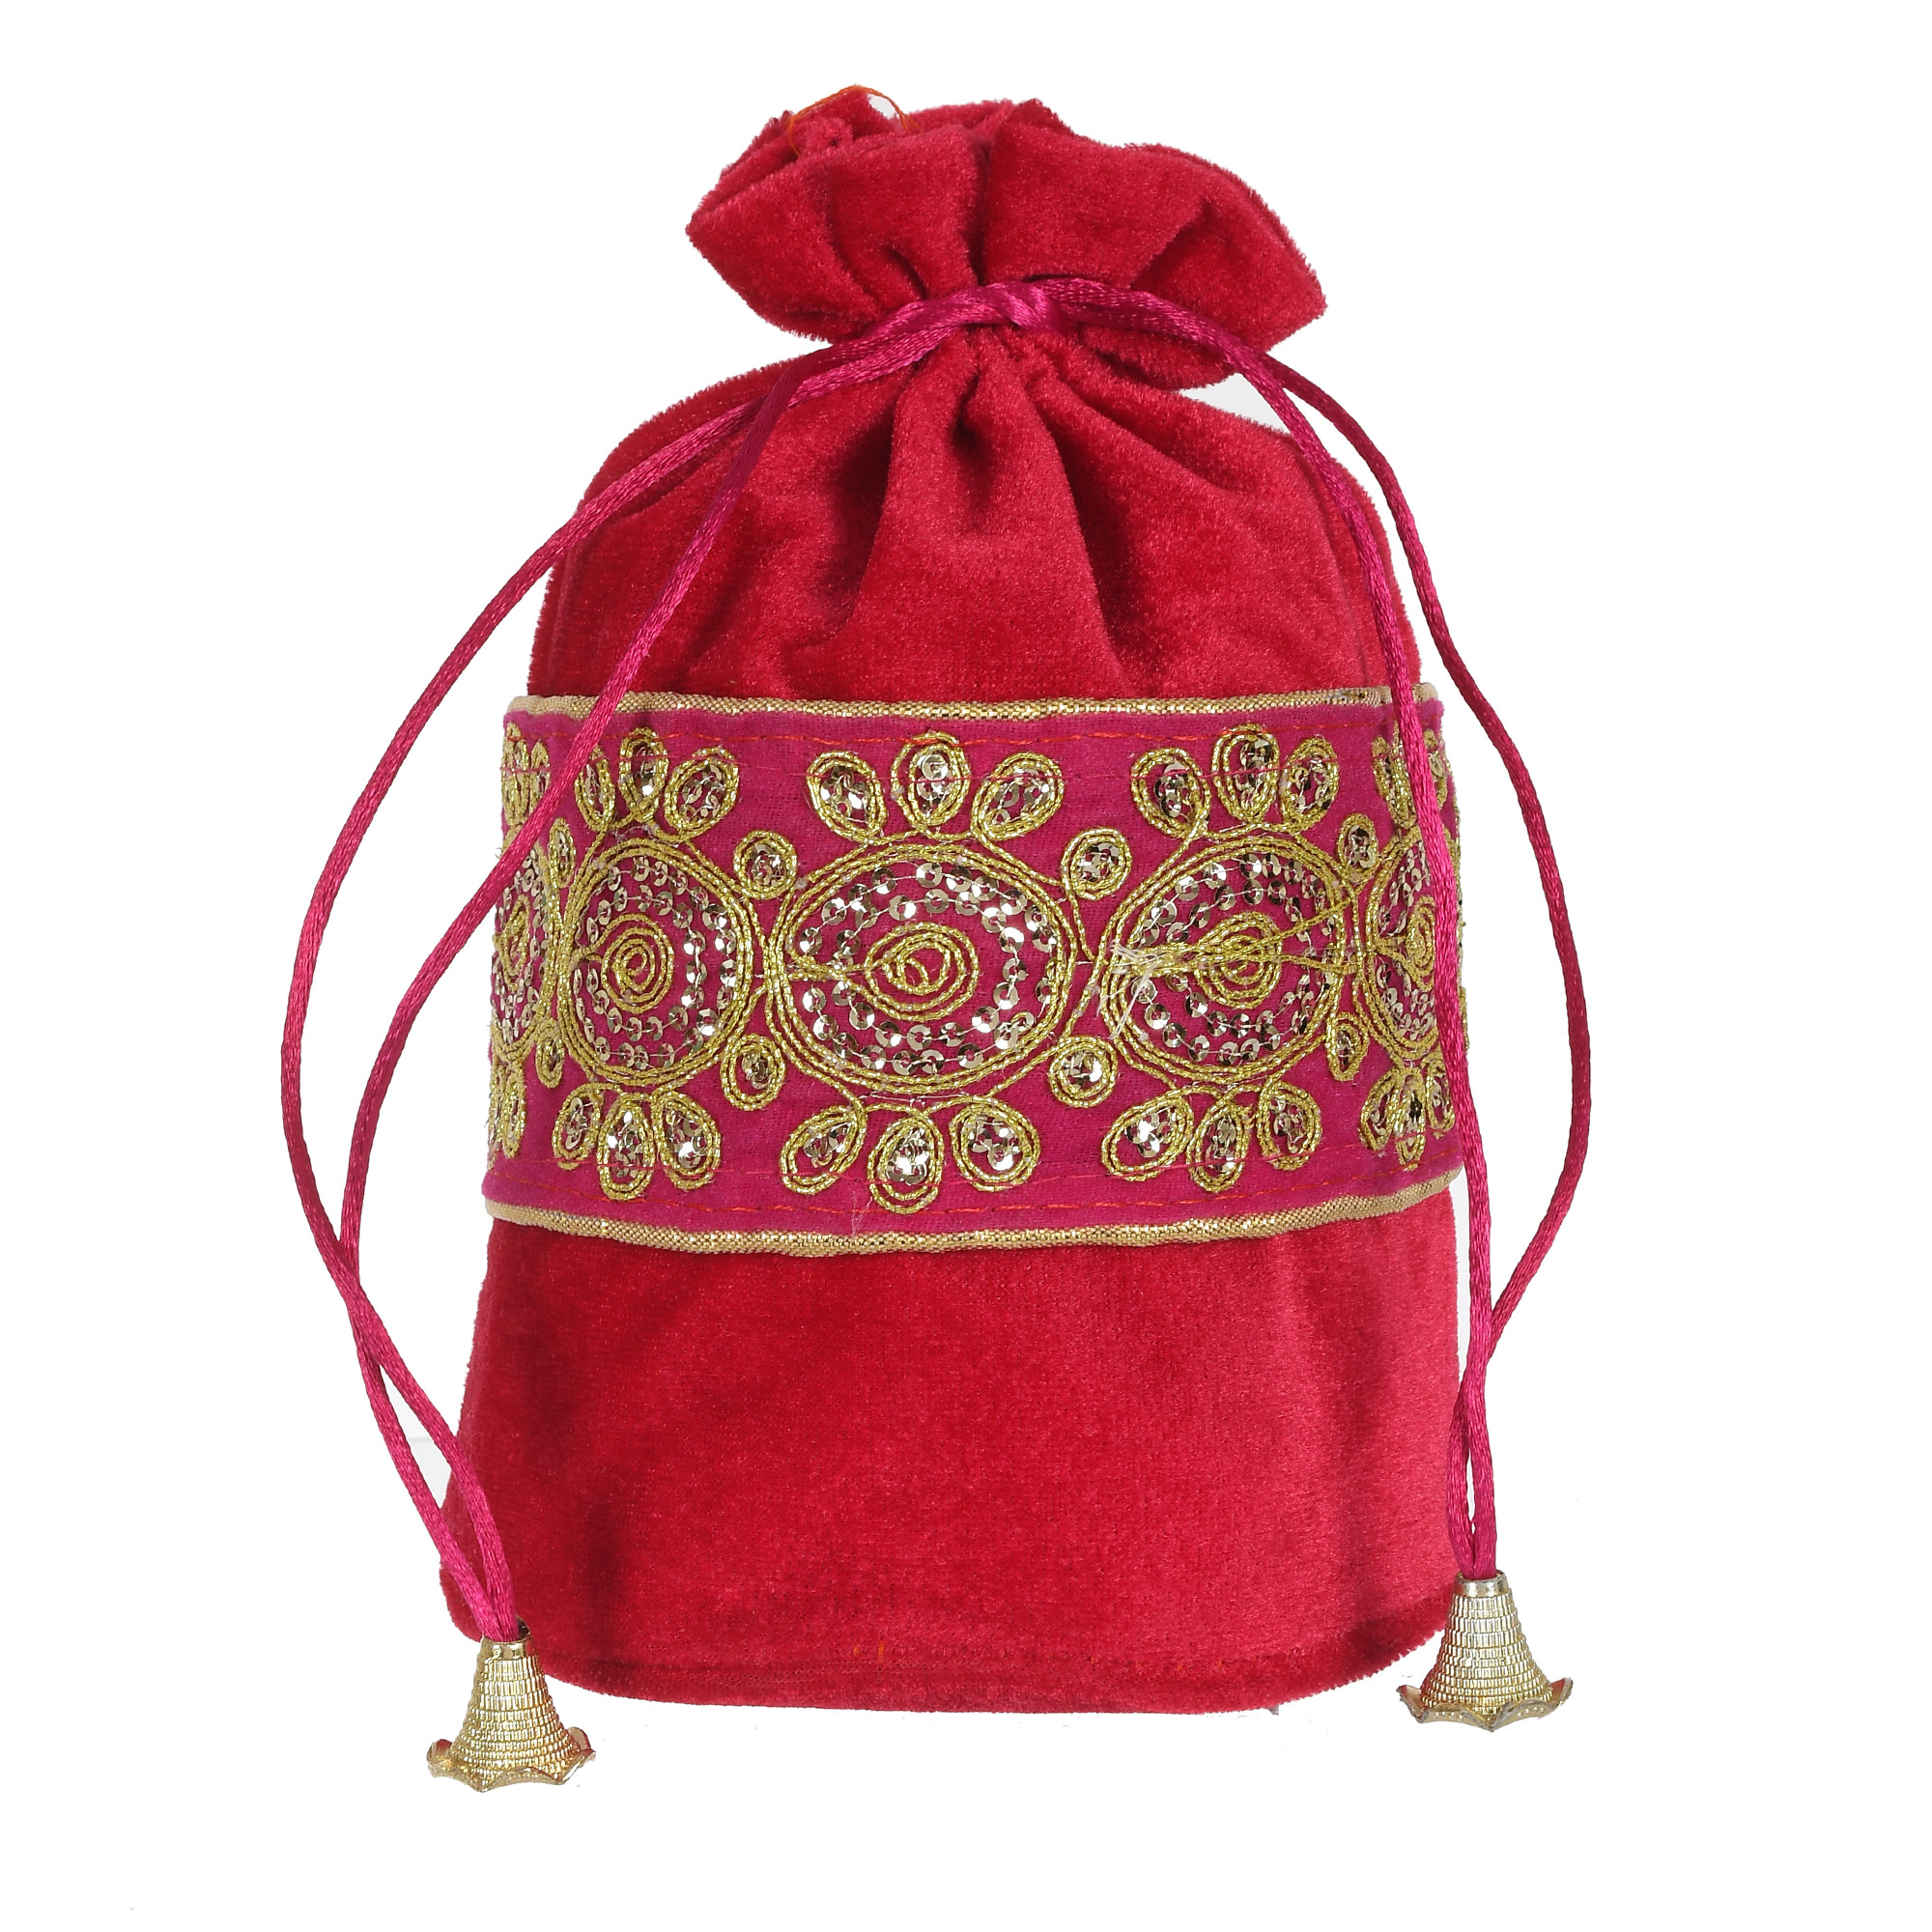 Kuber Industries Embroidered Design Drawstring Potli Bag Party Wedding Favor Gift Jewelry Bags-(Pink & Red)